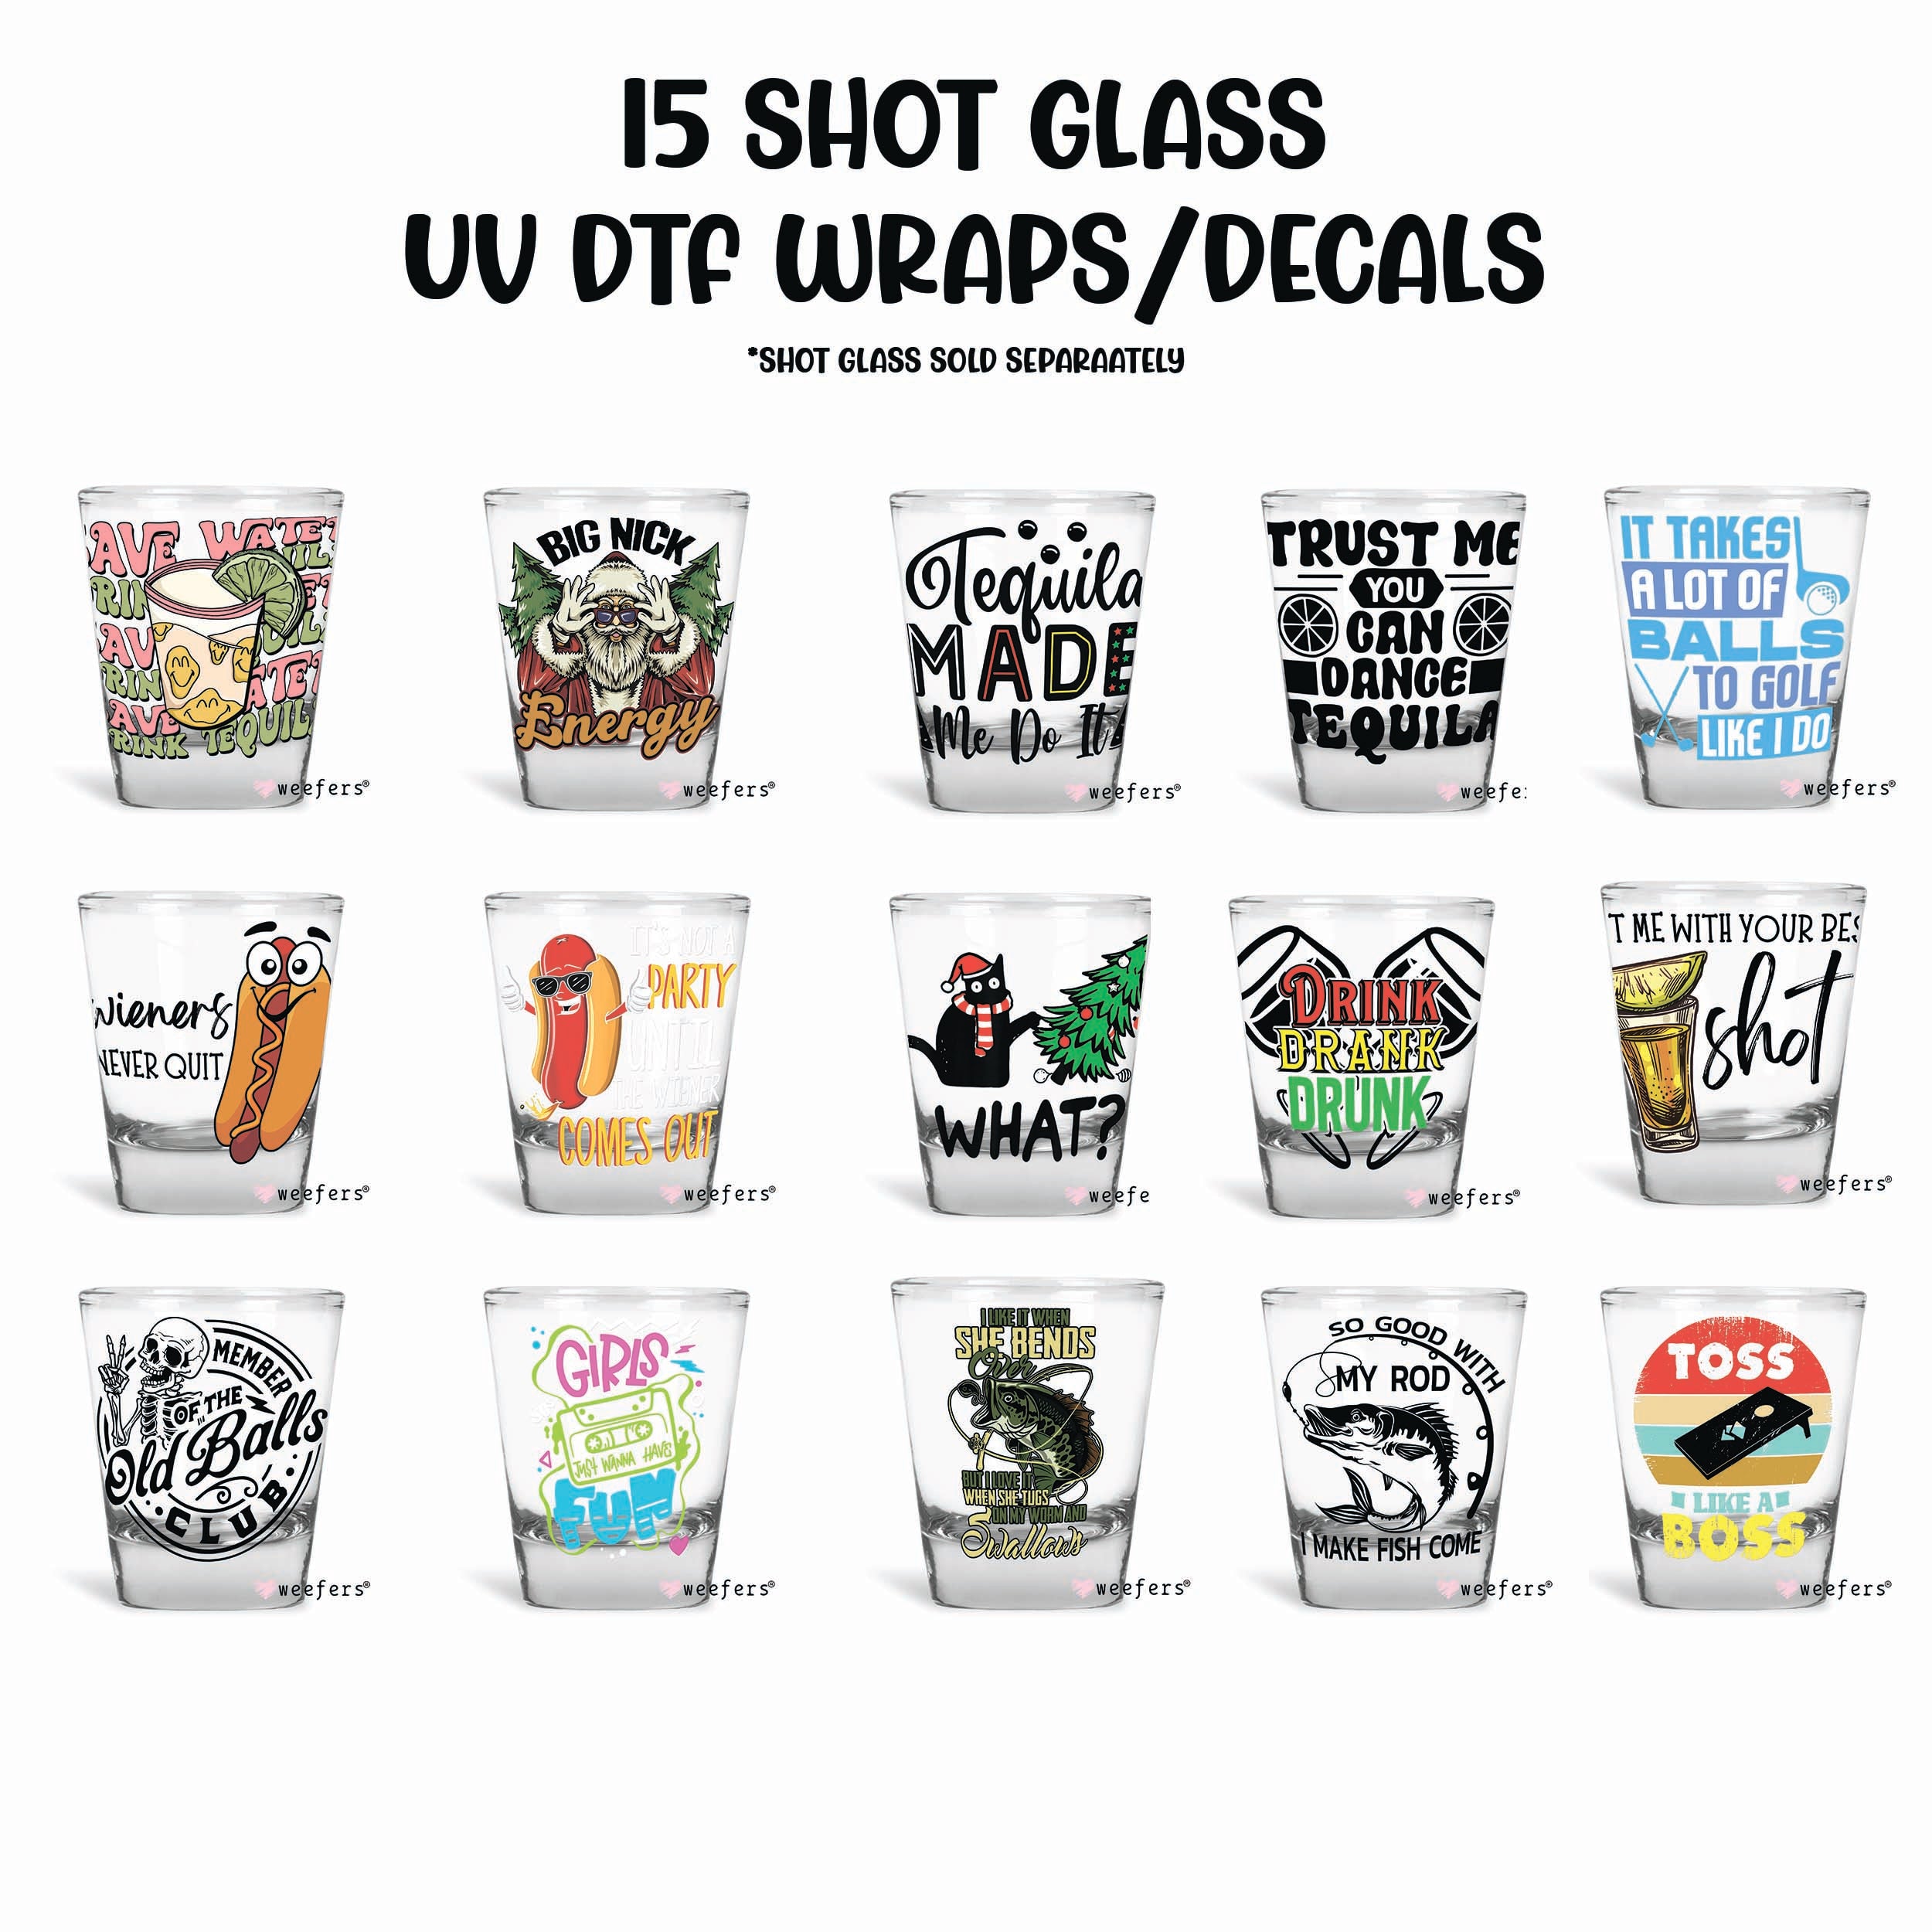 You're Like Really Pretty Shot Glass Short UVDTF or Sublimation Wrap - Decal